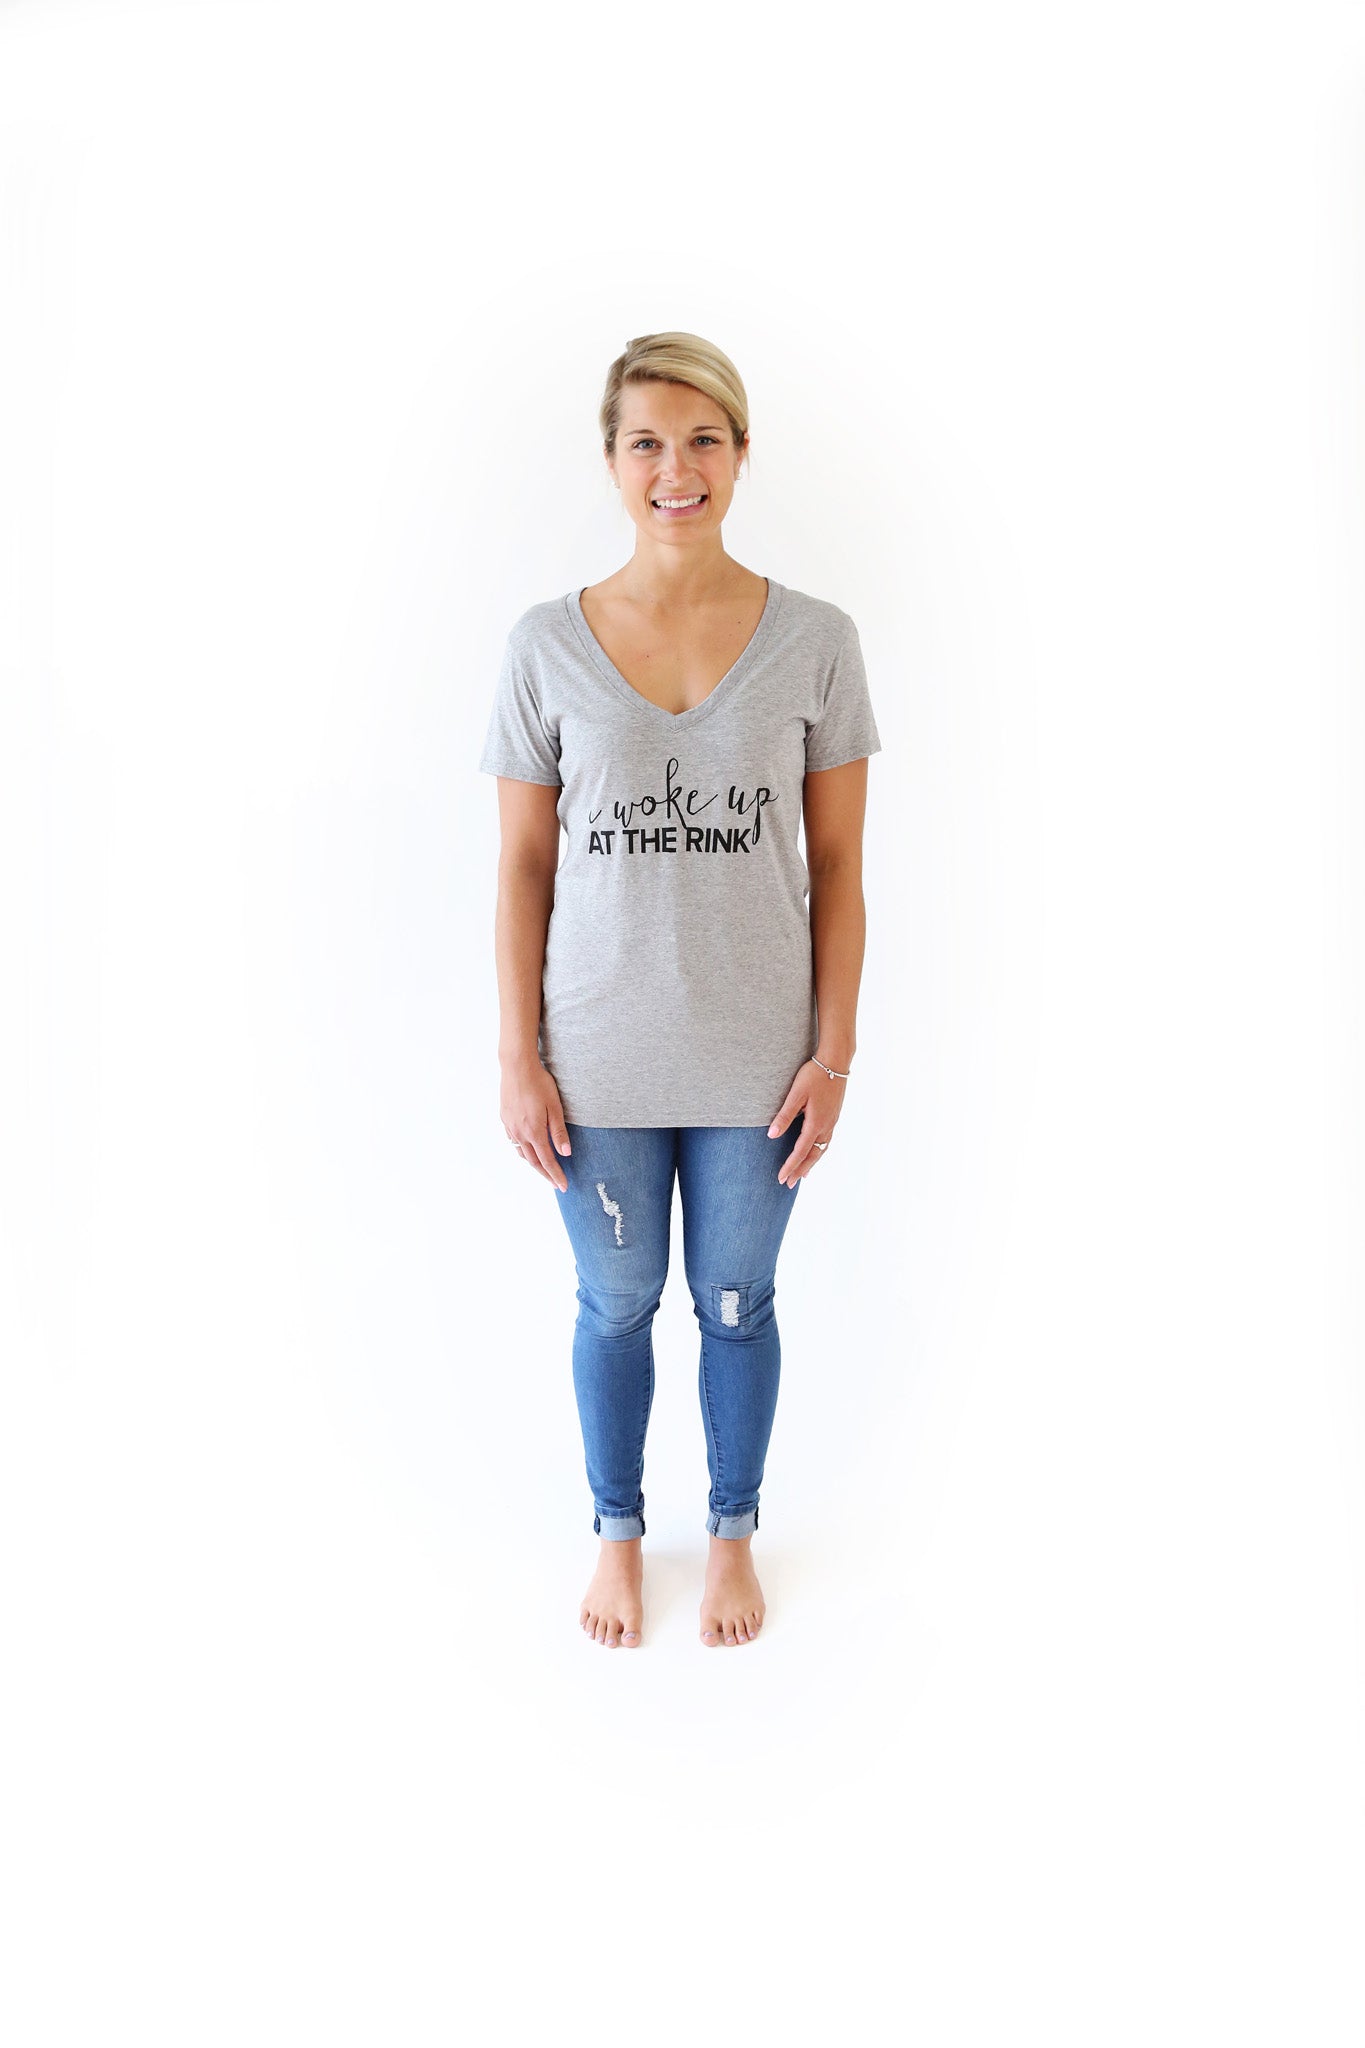 I Woke Up At The Rink Women's Tee